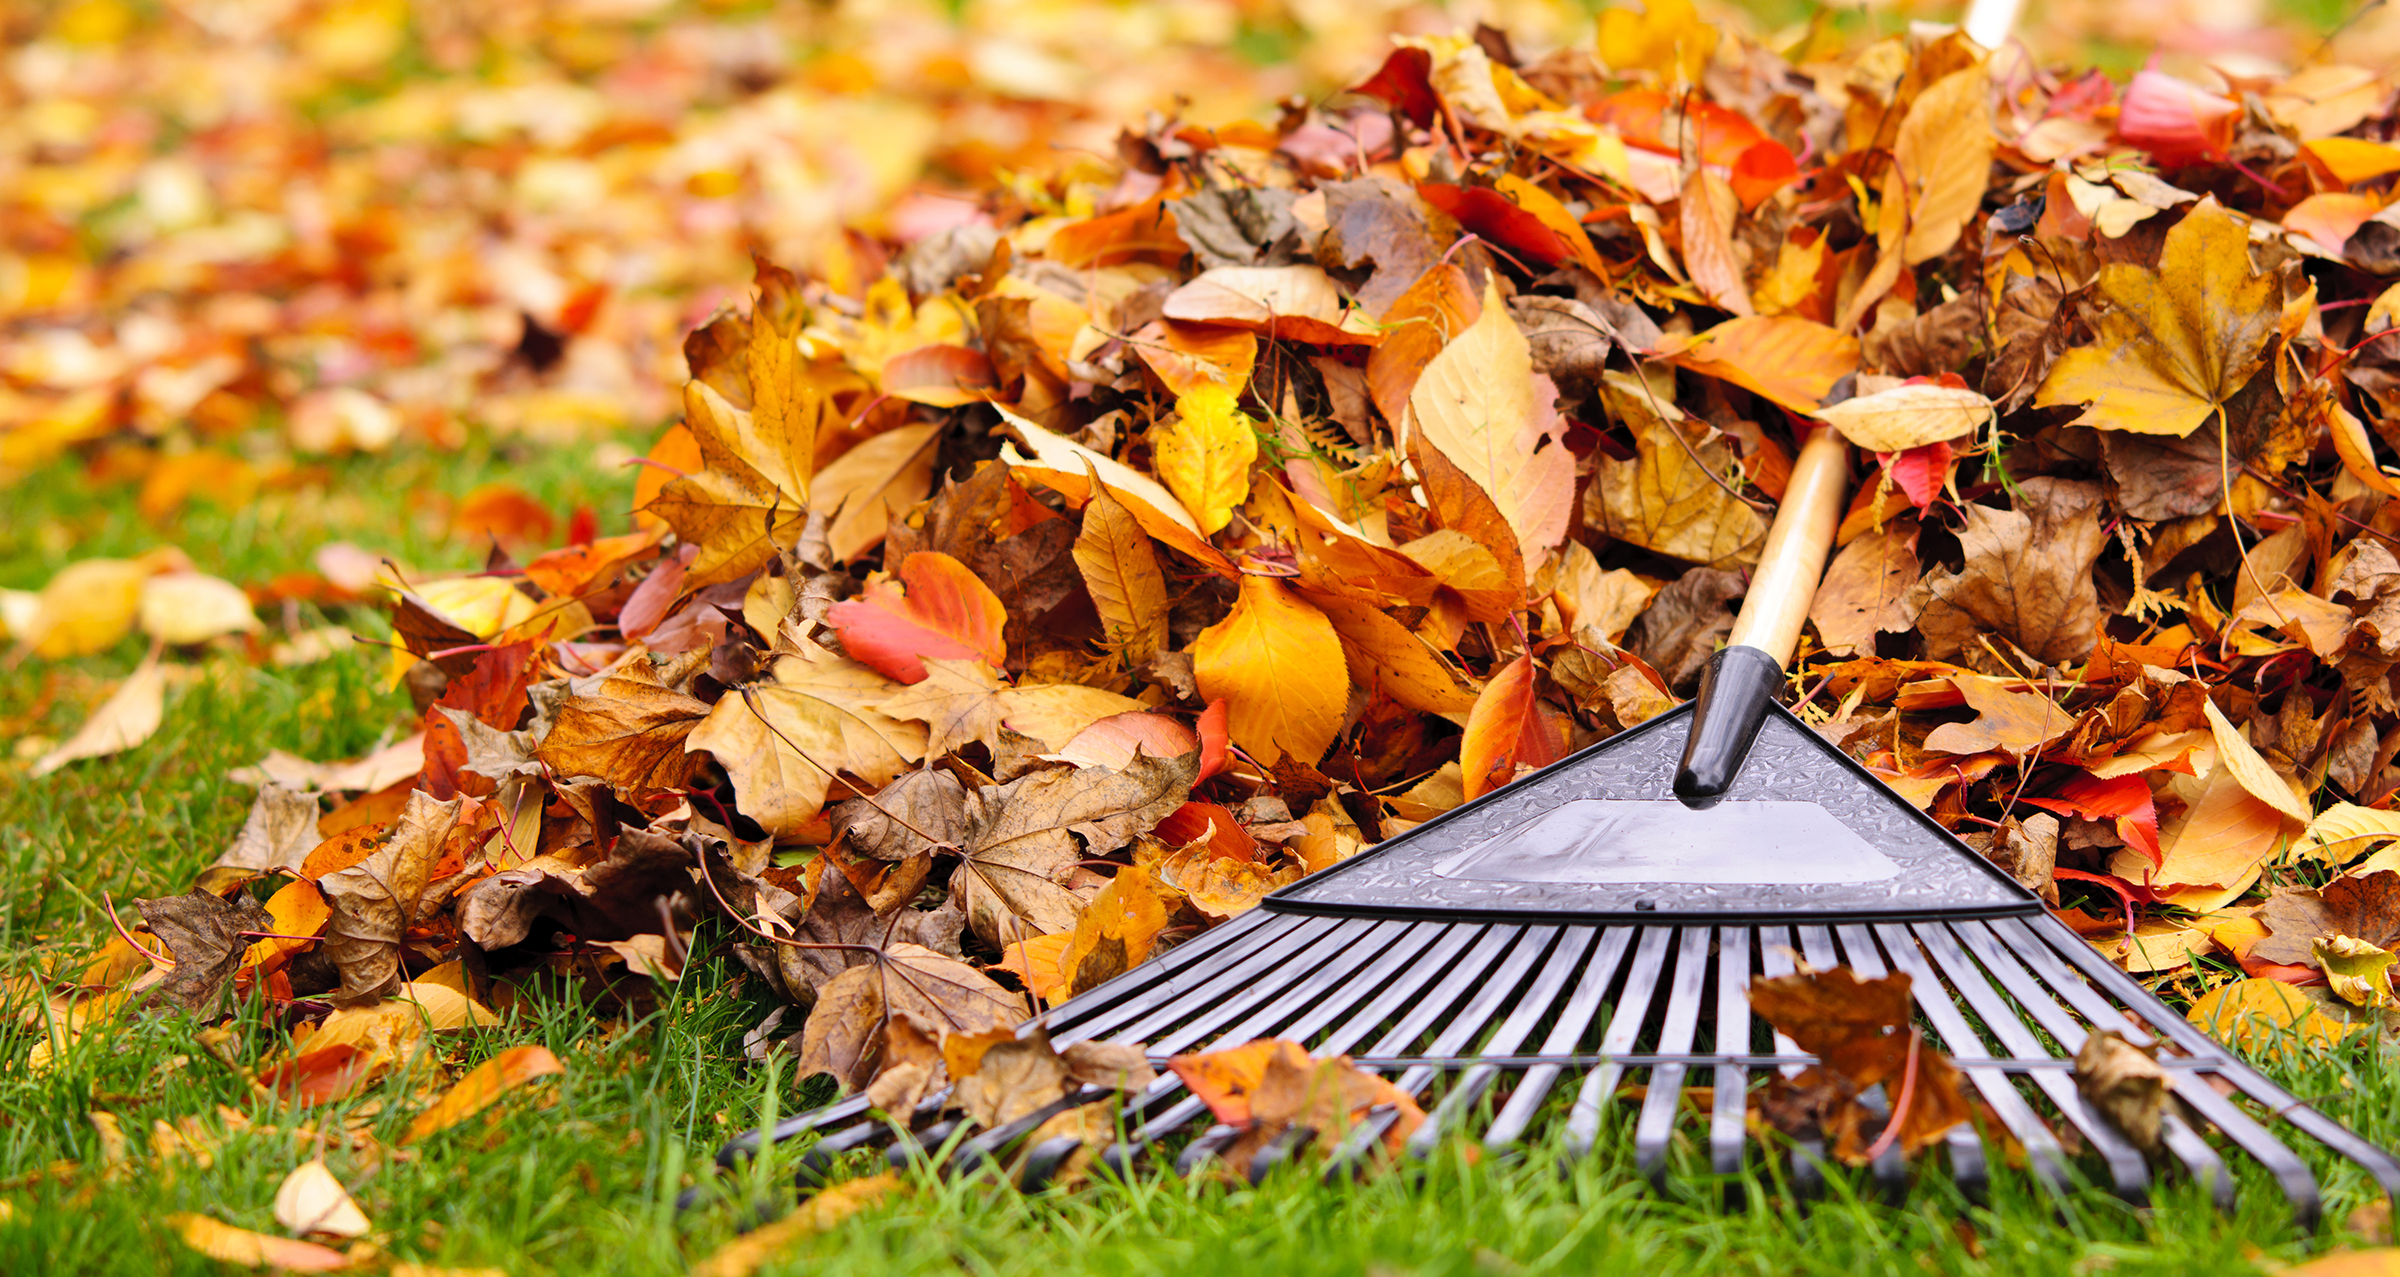 Pile,Of,Fall,Leaves,With,Fan,Rake,On,Lawn